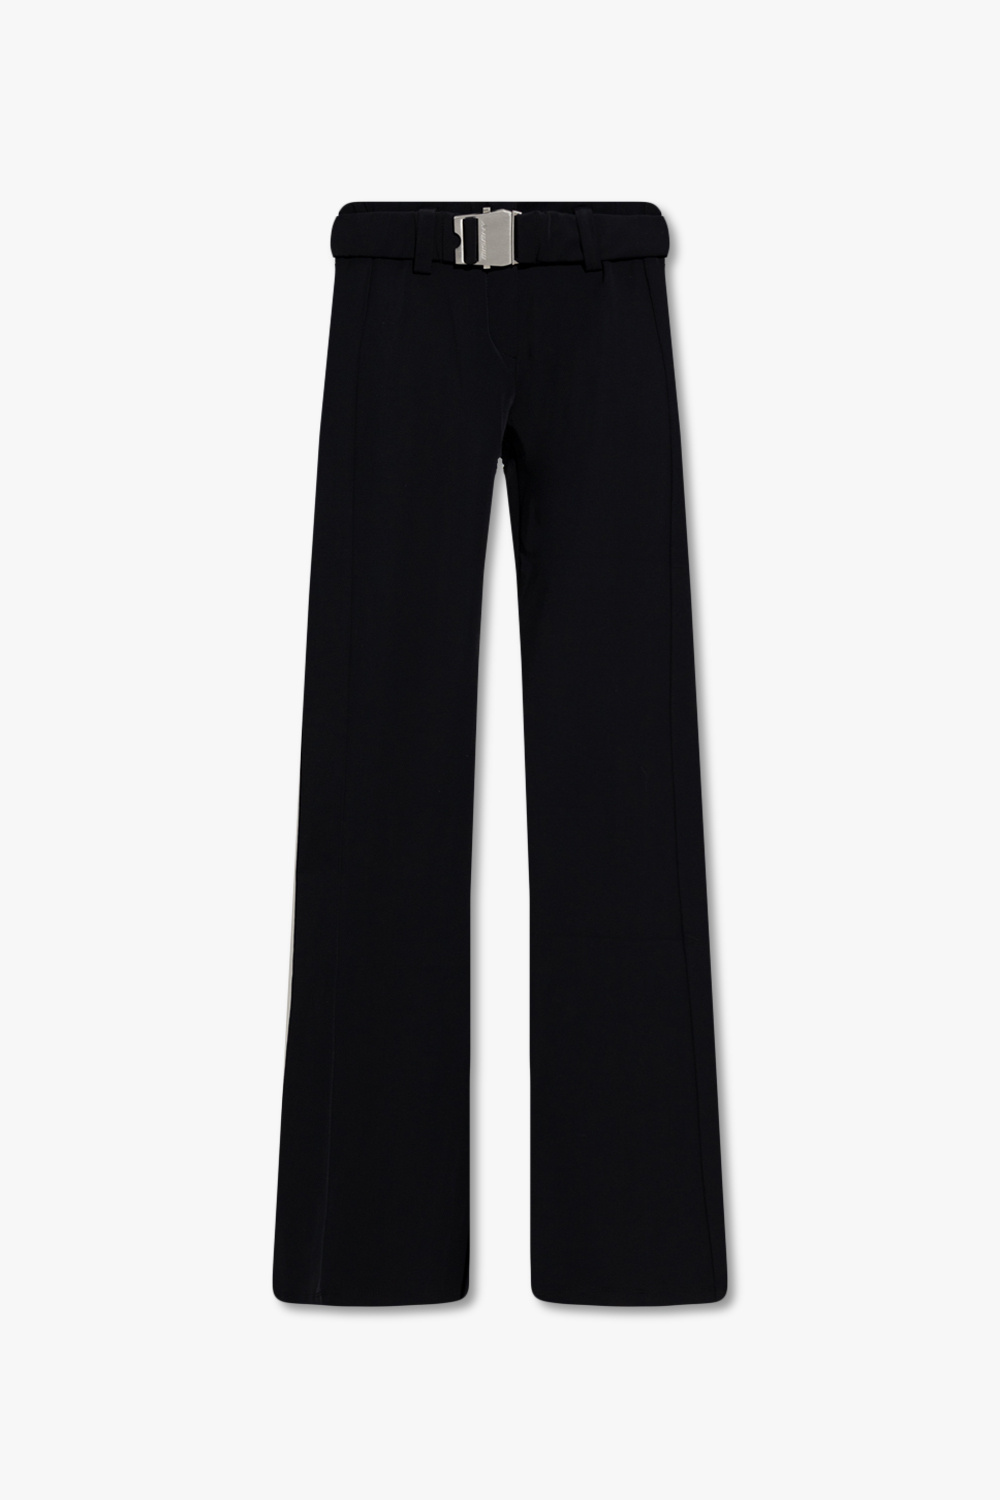 MISBHV ‘Lara’ low rise flared trousers